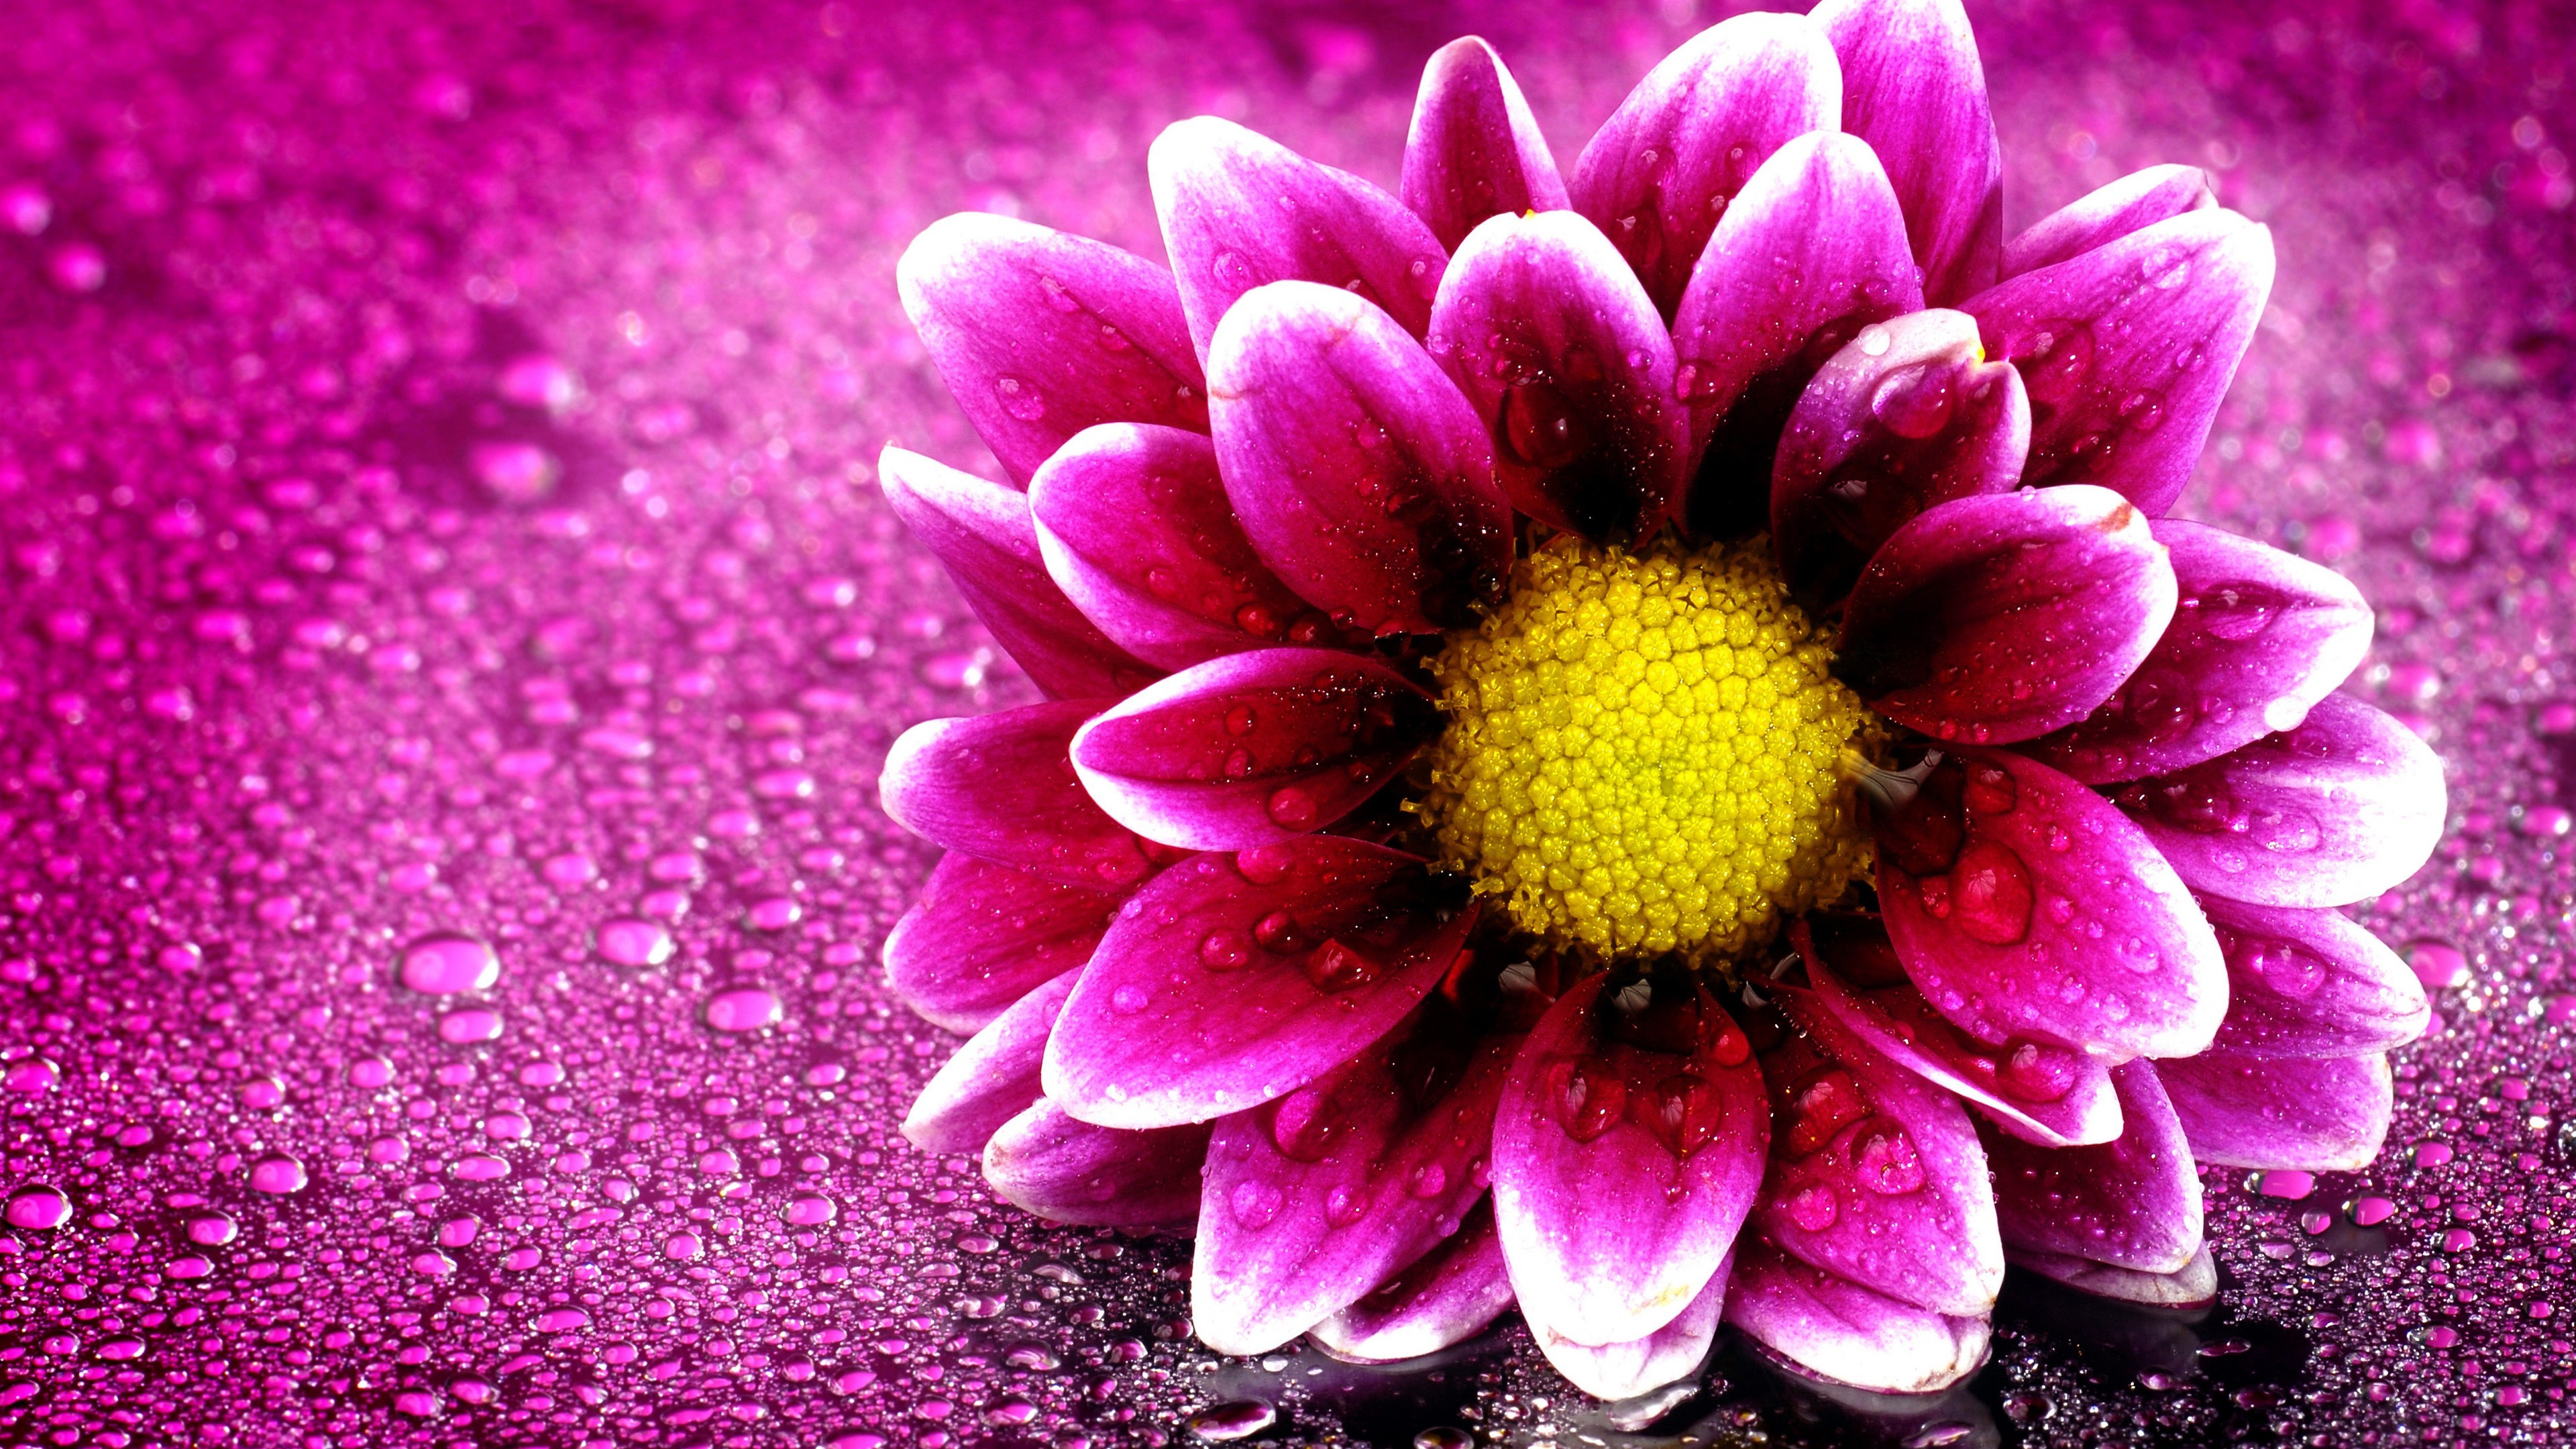 Flowers wallpaper ·① Download free beautiful High Resolution wallpapers